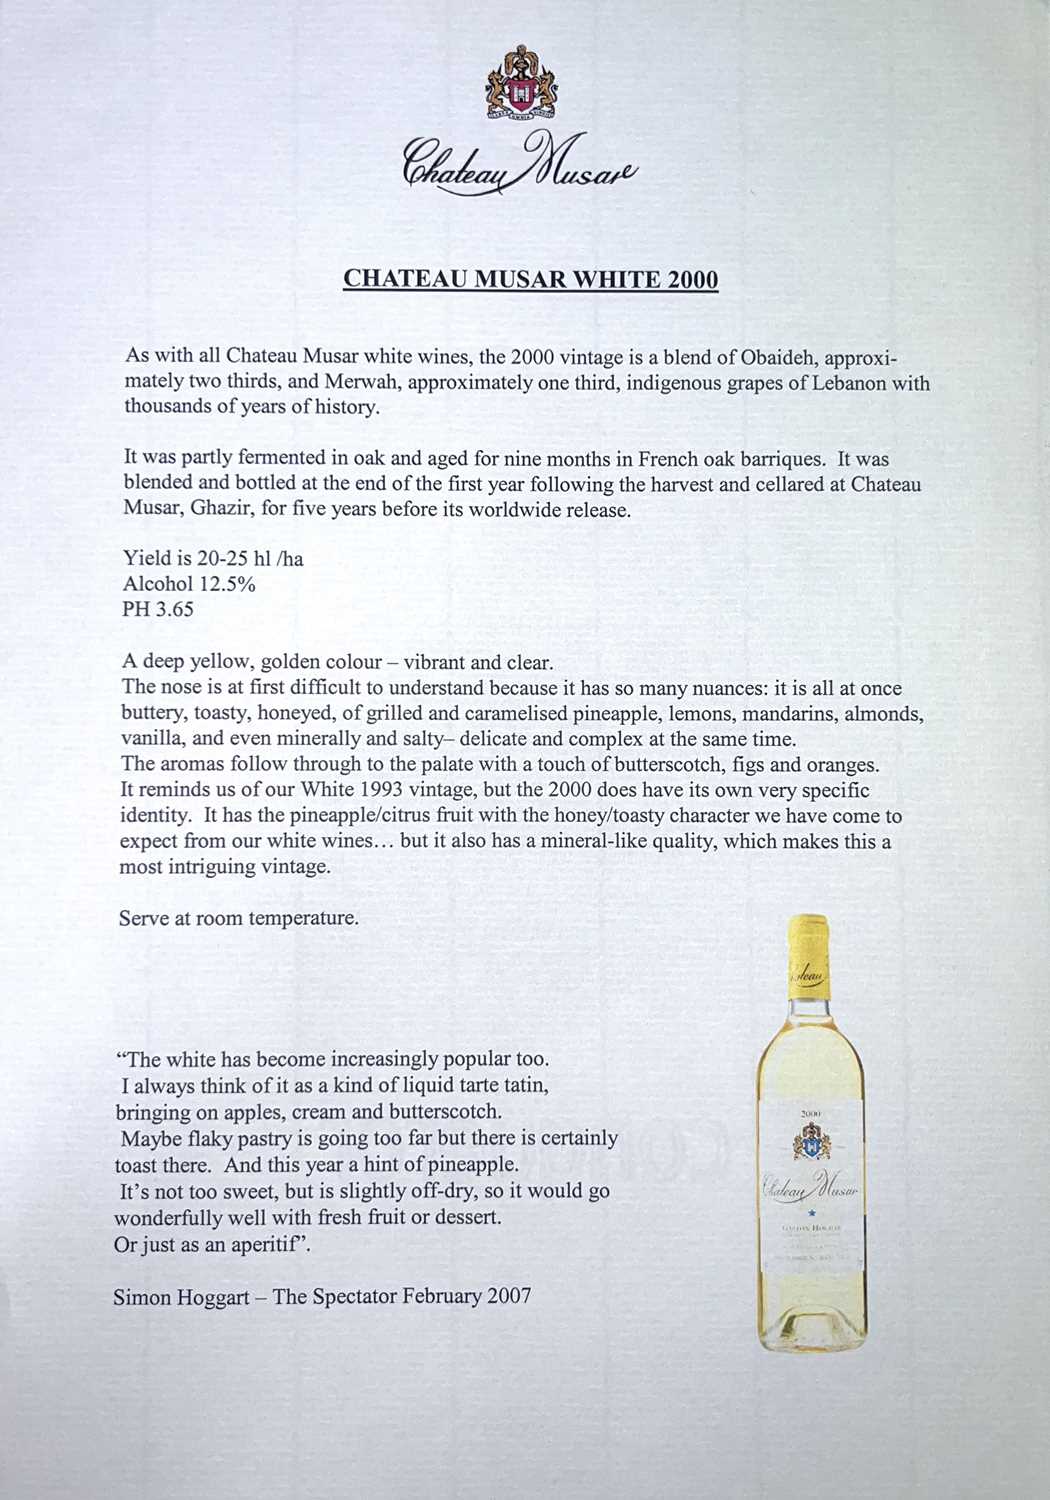 Chateau Musar white - Image 2 of 2